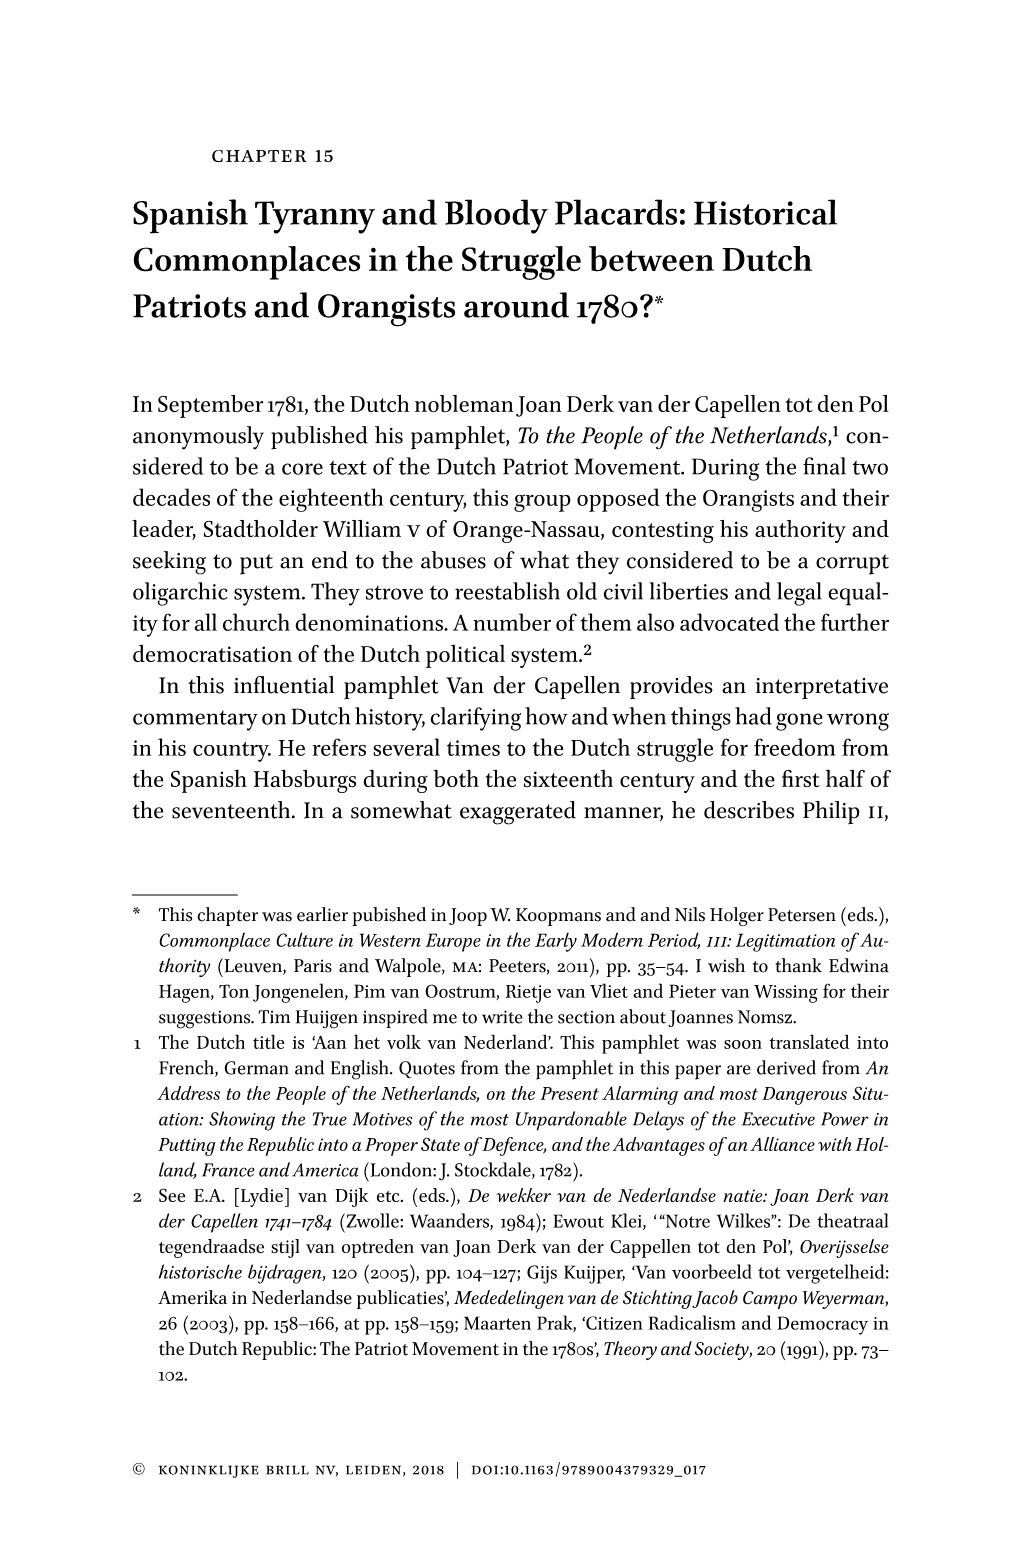 Historical Commonplaces in the Struggle Between Dutch Patriots and Orangists Around 1780?*